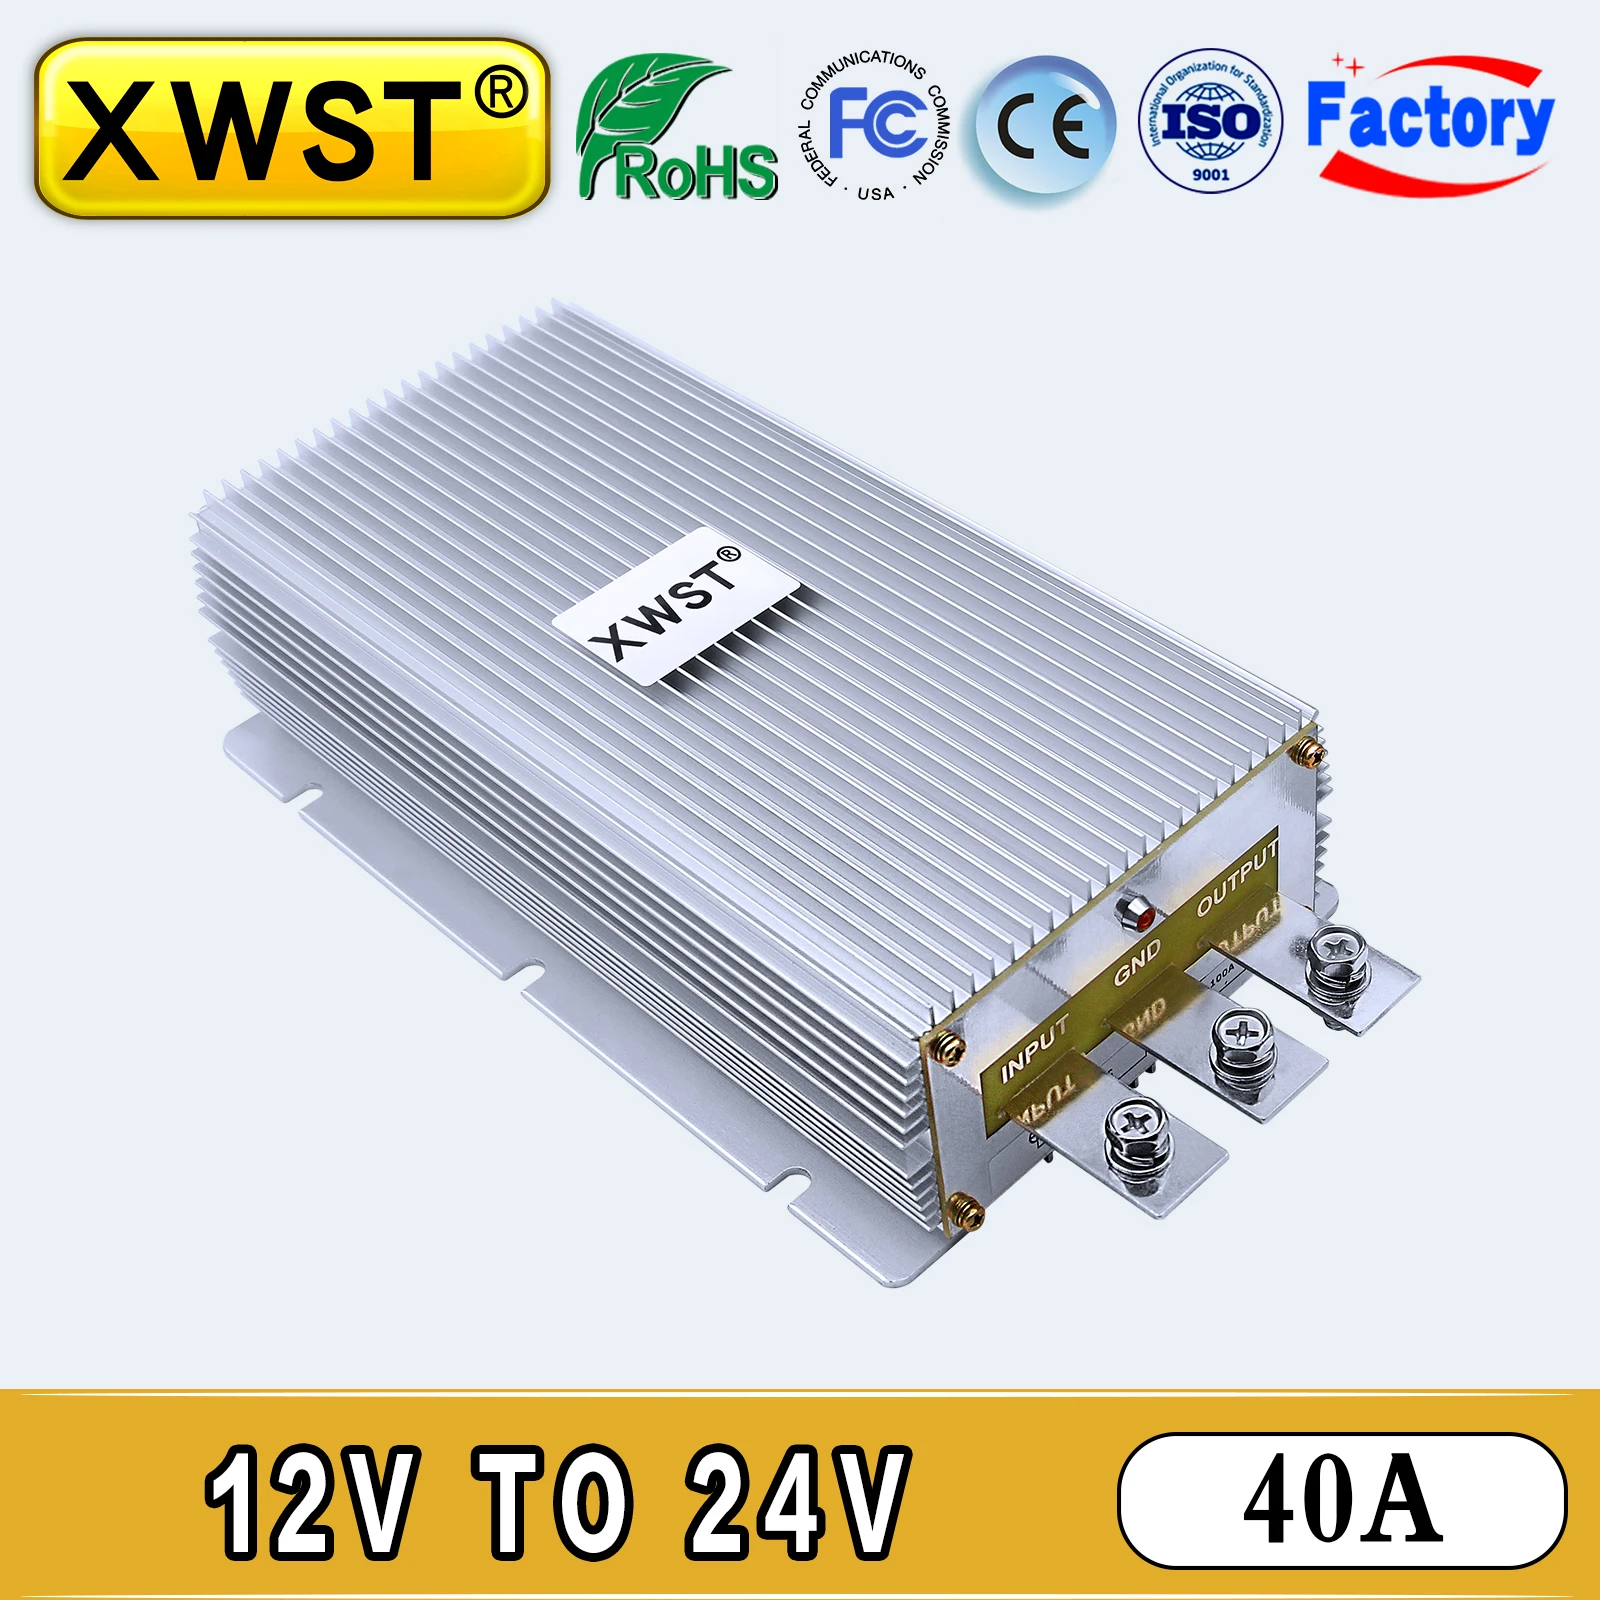 

XWST DC DC Converter 12V to 24V Power Supply Inverter 40A 960W Voltage Regulator Step-up Boost Module Waterproof CE for Trucks